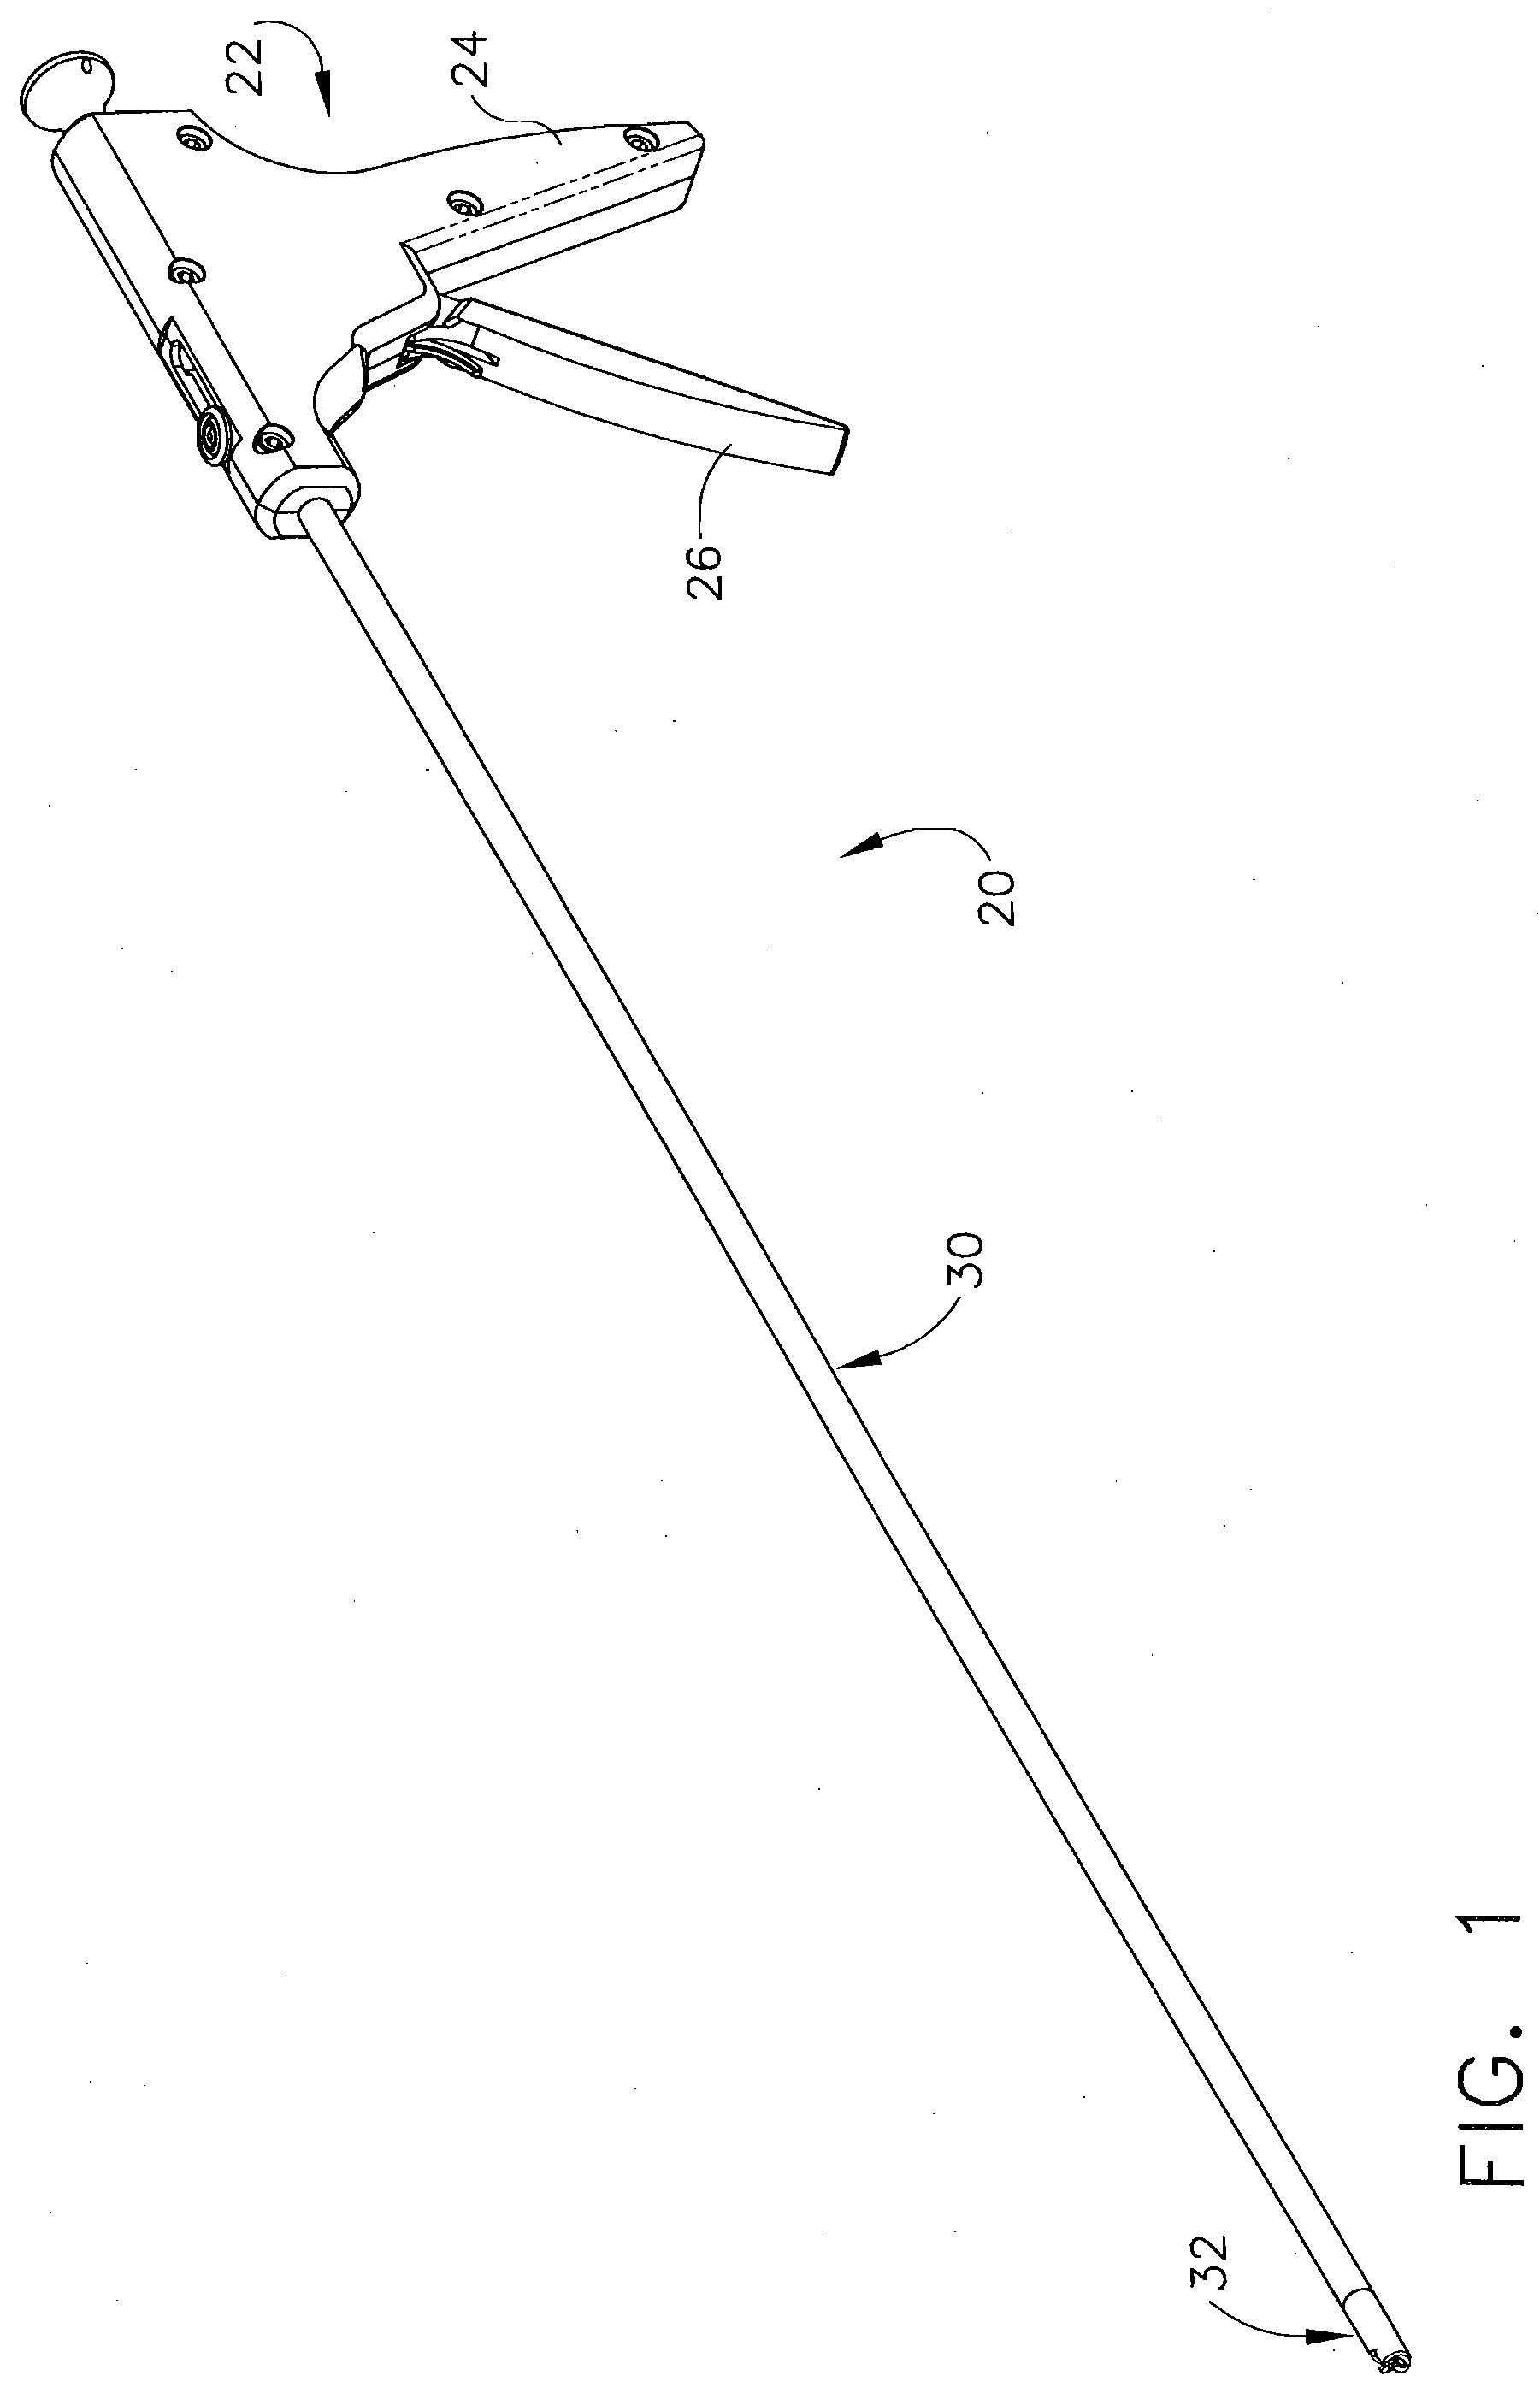 Disposable cartridge for use in a gastric volume reduction procedure